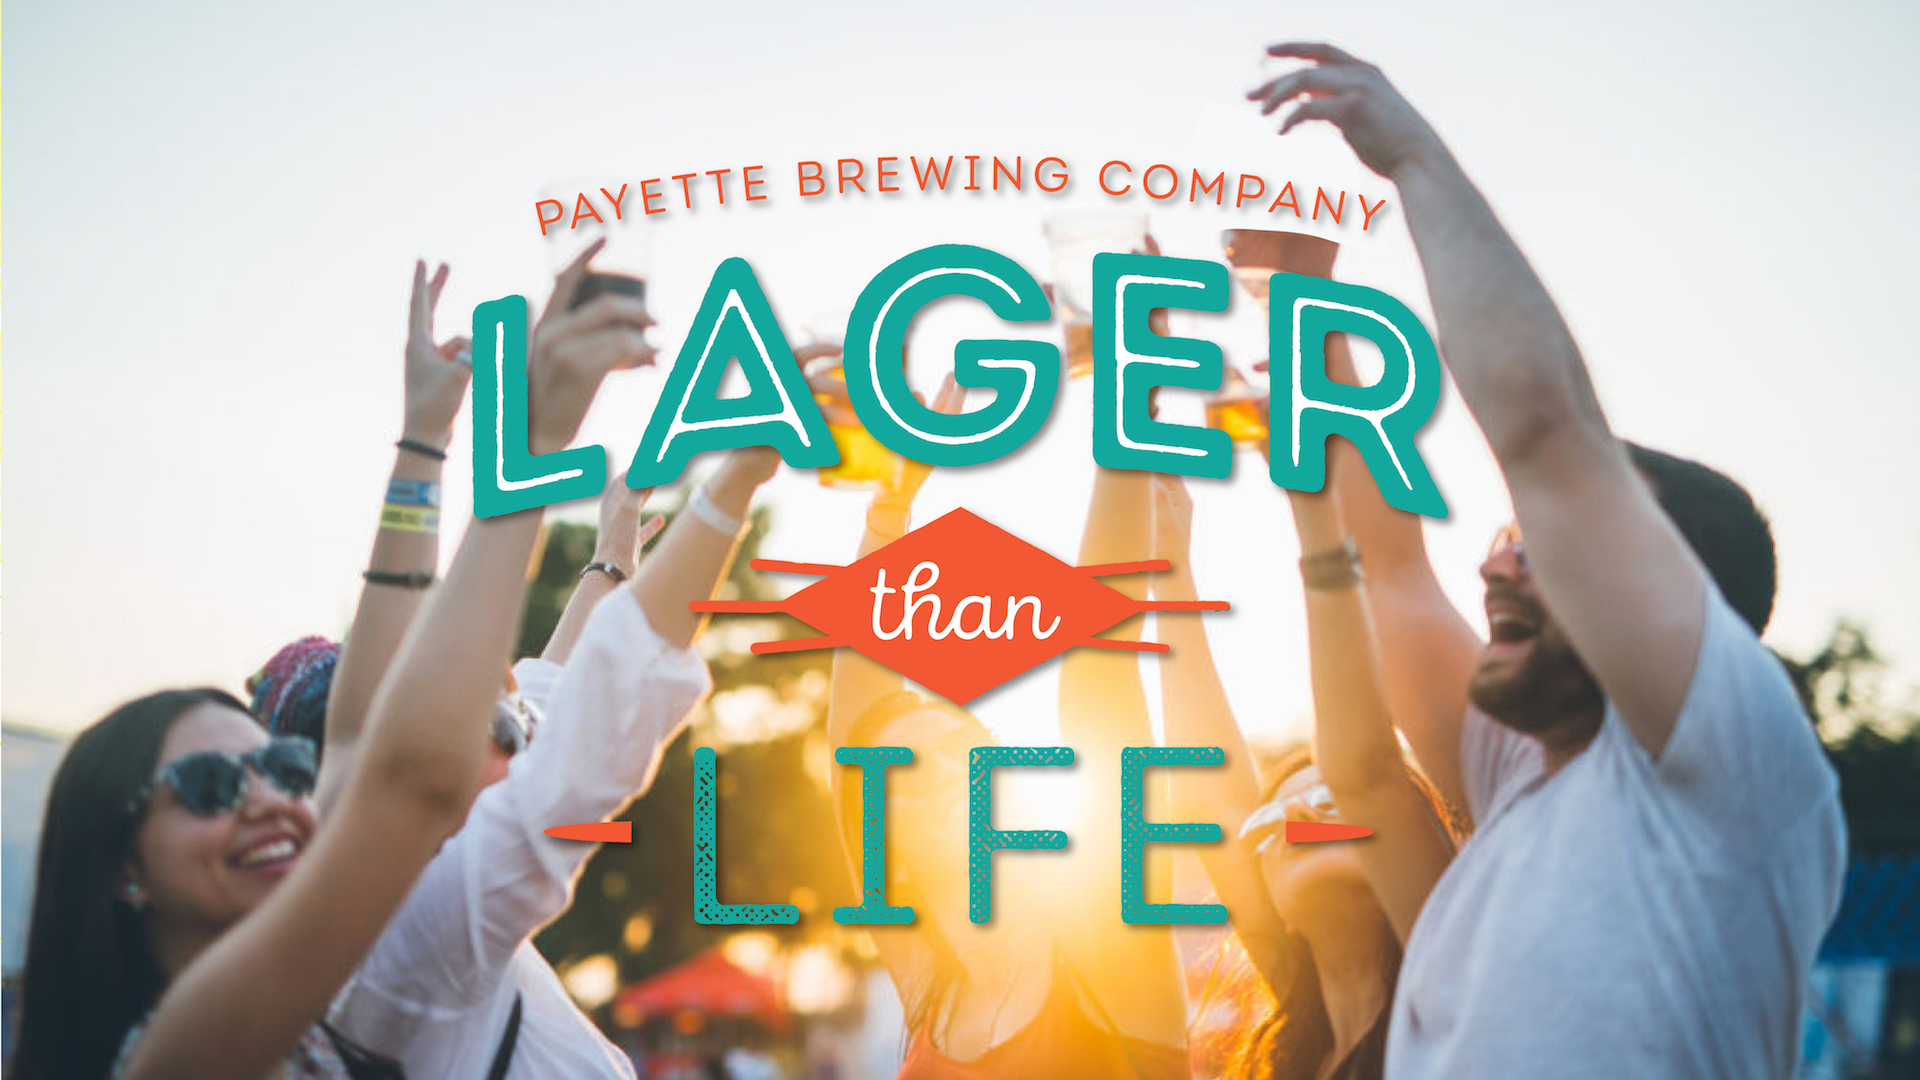 payette-brewing-lager-than-life-lager-festival-drinkedin-trends